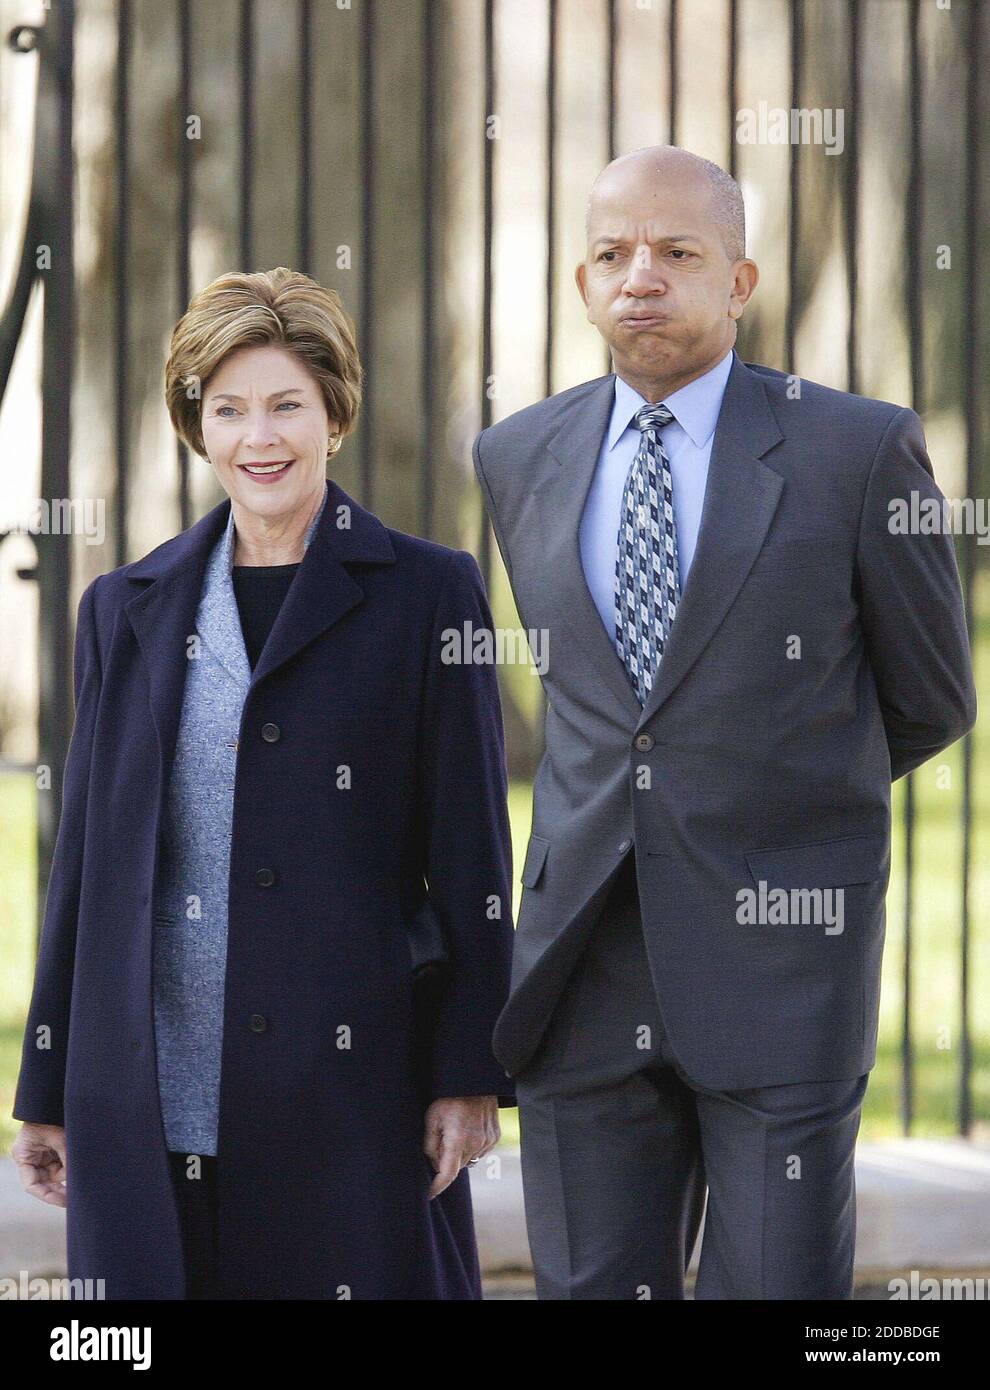 NO FILM, NO VIDEO, NO TV, NO DOCUMENTARY - Mrs. Laura Bush is joined by Tony Williams, Mayor of Washington, D.C., in front of the White House during a ceremony to re-open Pennsylvania Avenue to pedestrian traffic, on November 9, 2004, in Washington, D.C, USA. Photo by Chuck Kennedy/US News Story Slugged/KRT/ABACA. Stock Photo